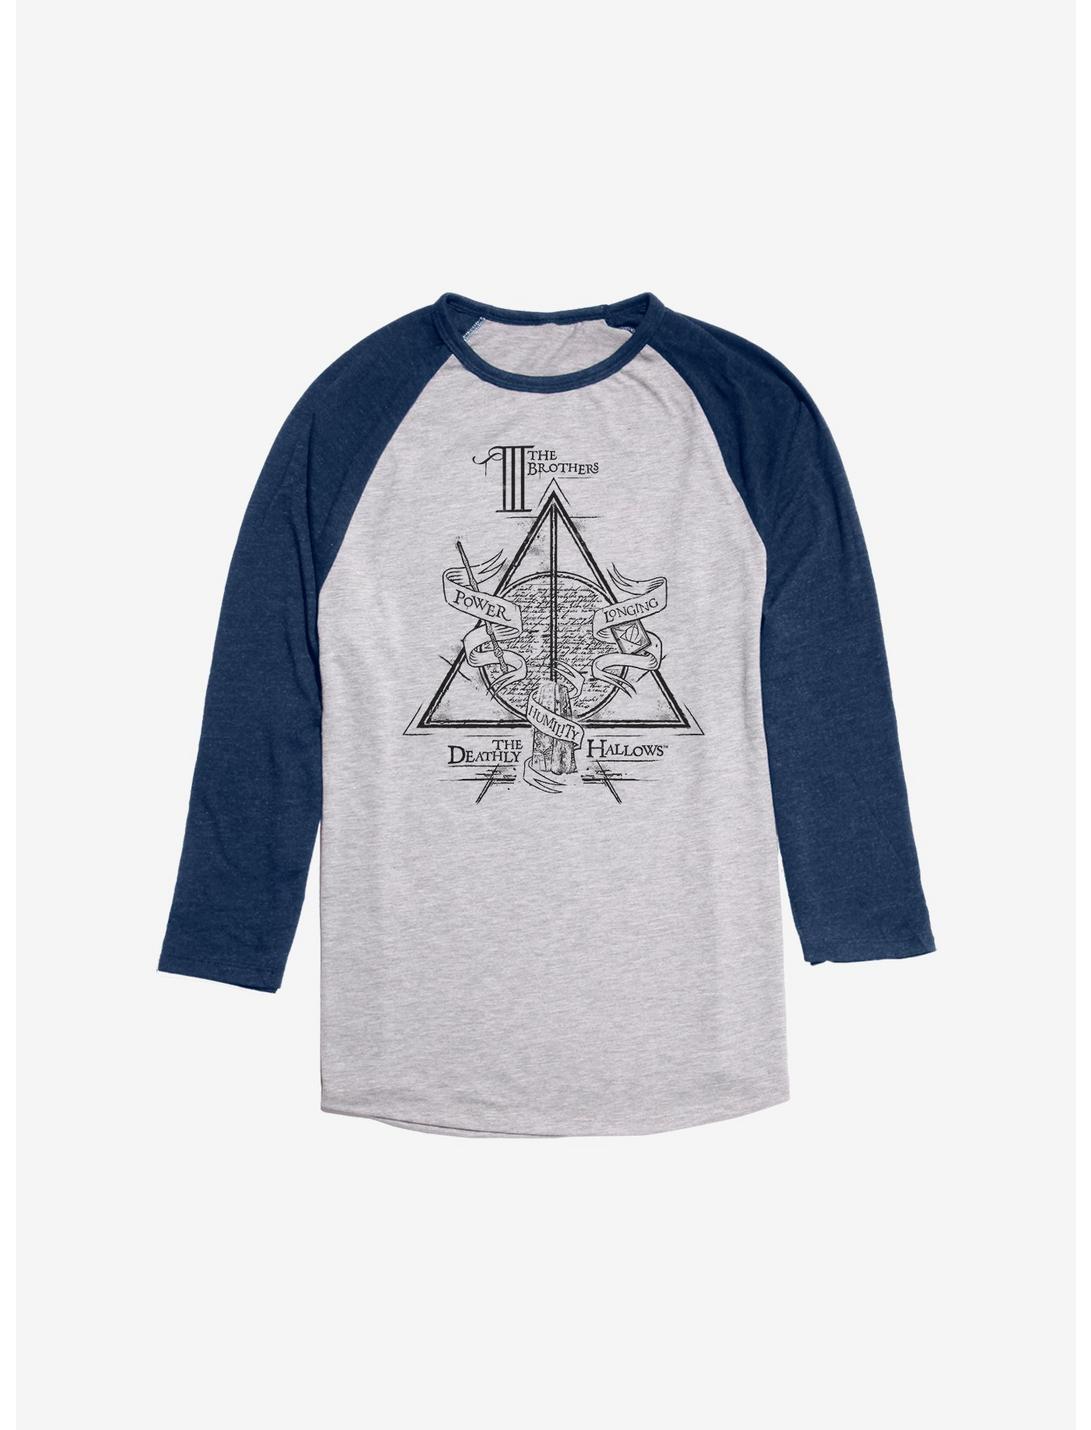 Harry Potter The Deathly Hallows Raglan, Ath Heather With Navy, hi-res